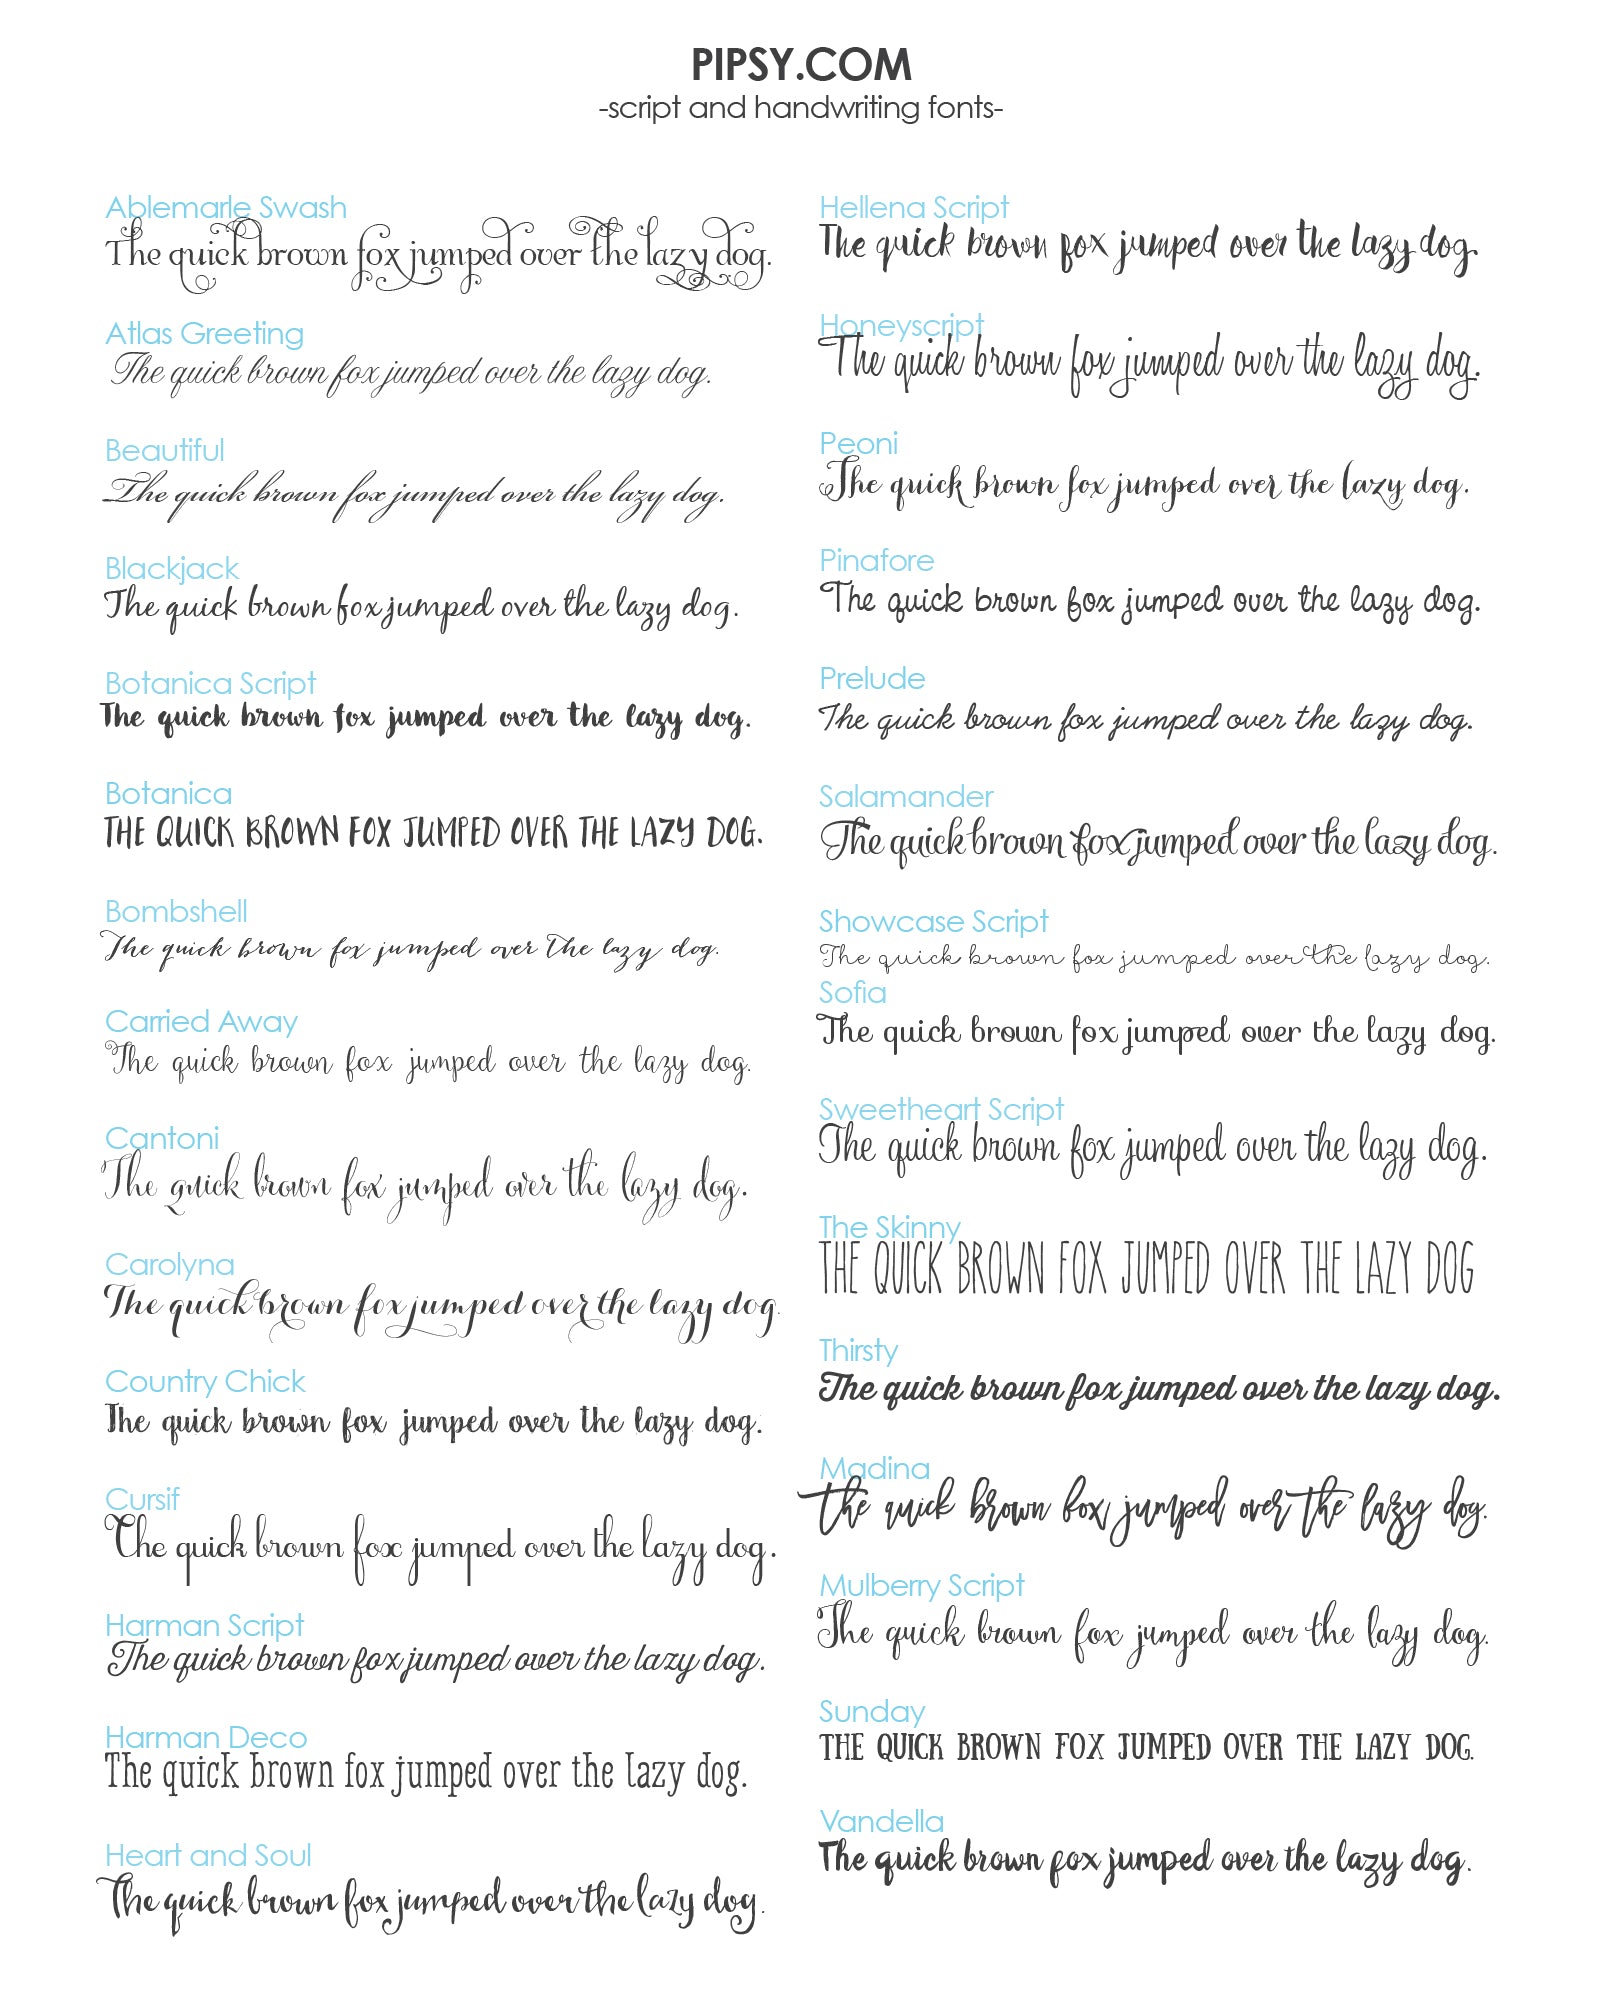 Pipsy Font List - Script and Handwriting